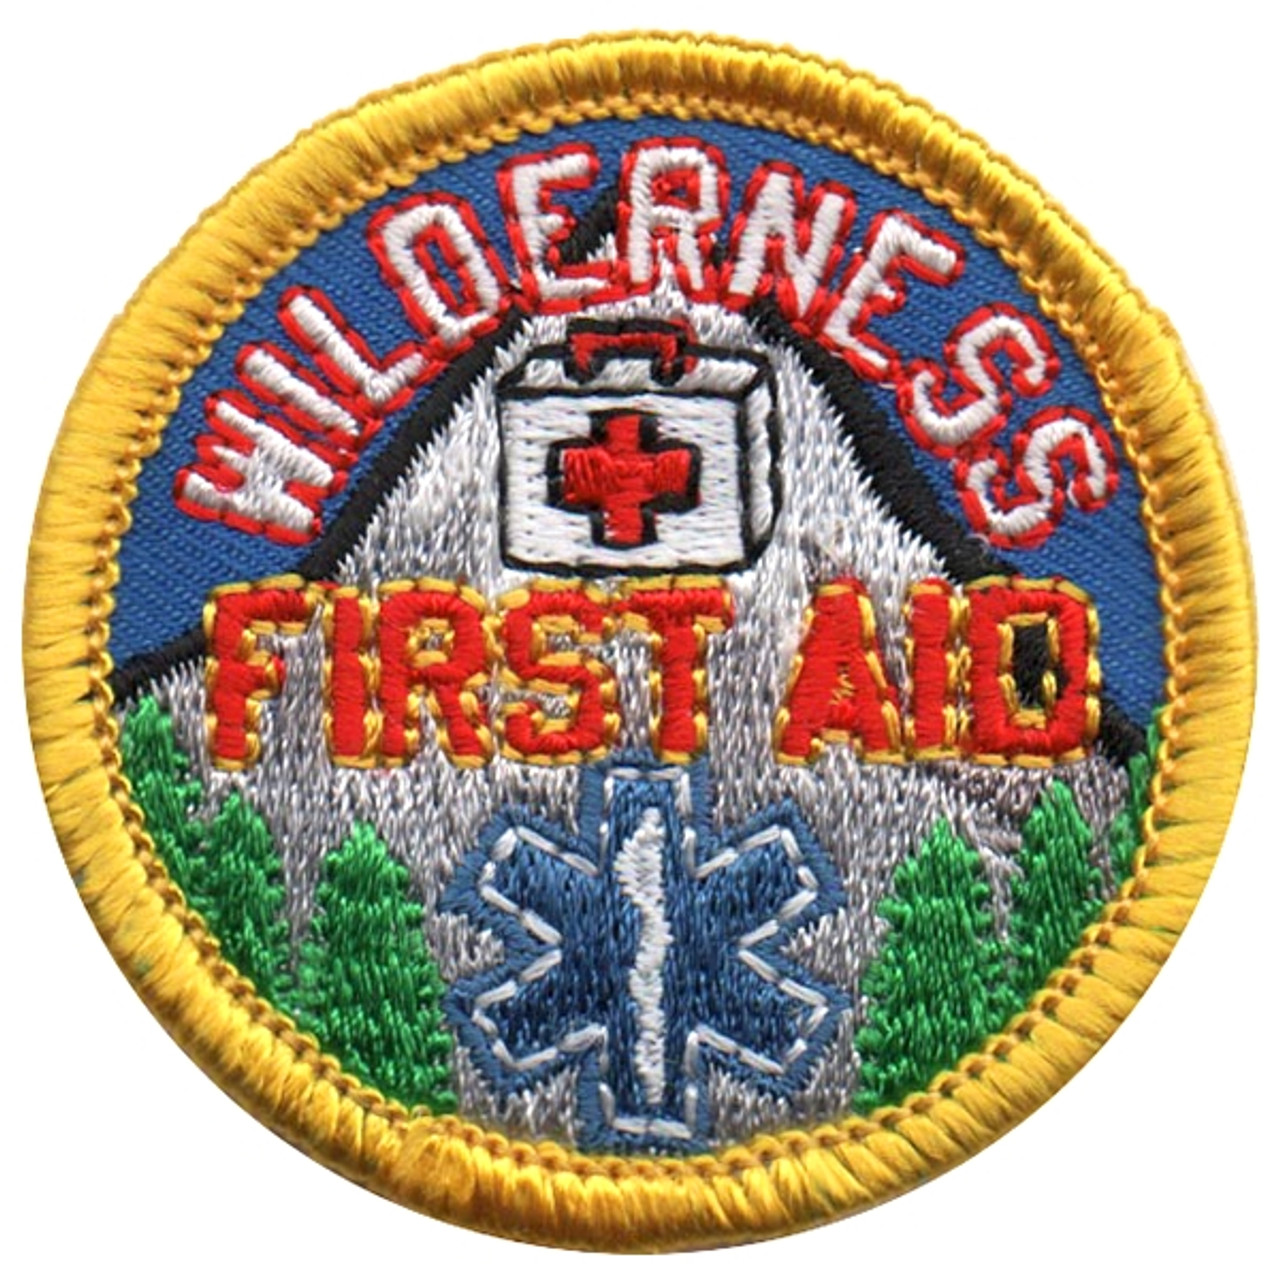 FIRST AID PATCH